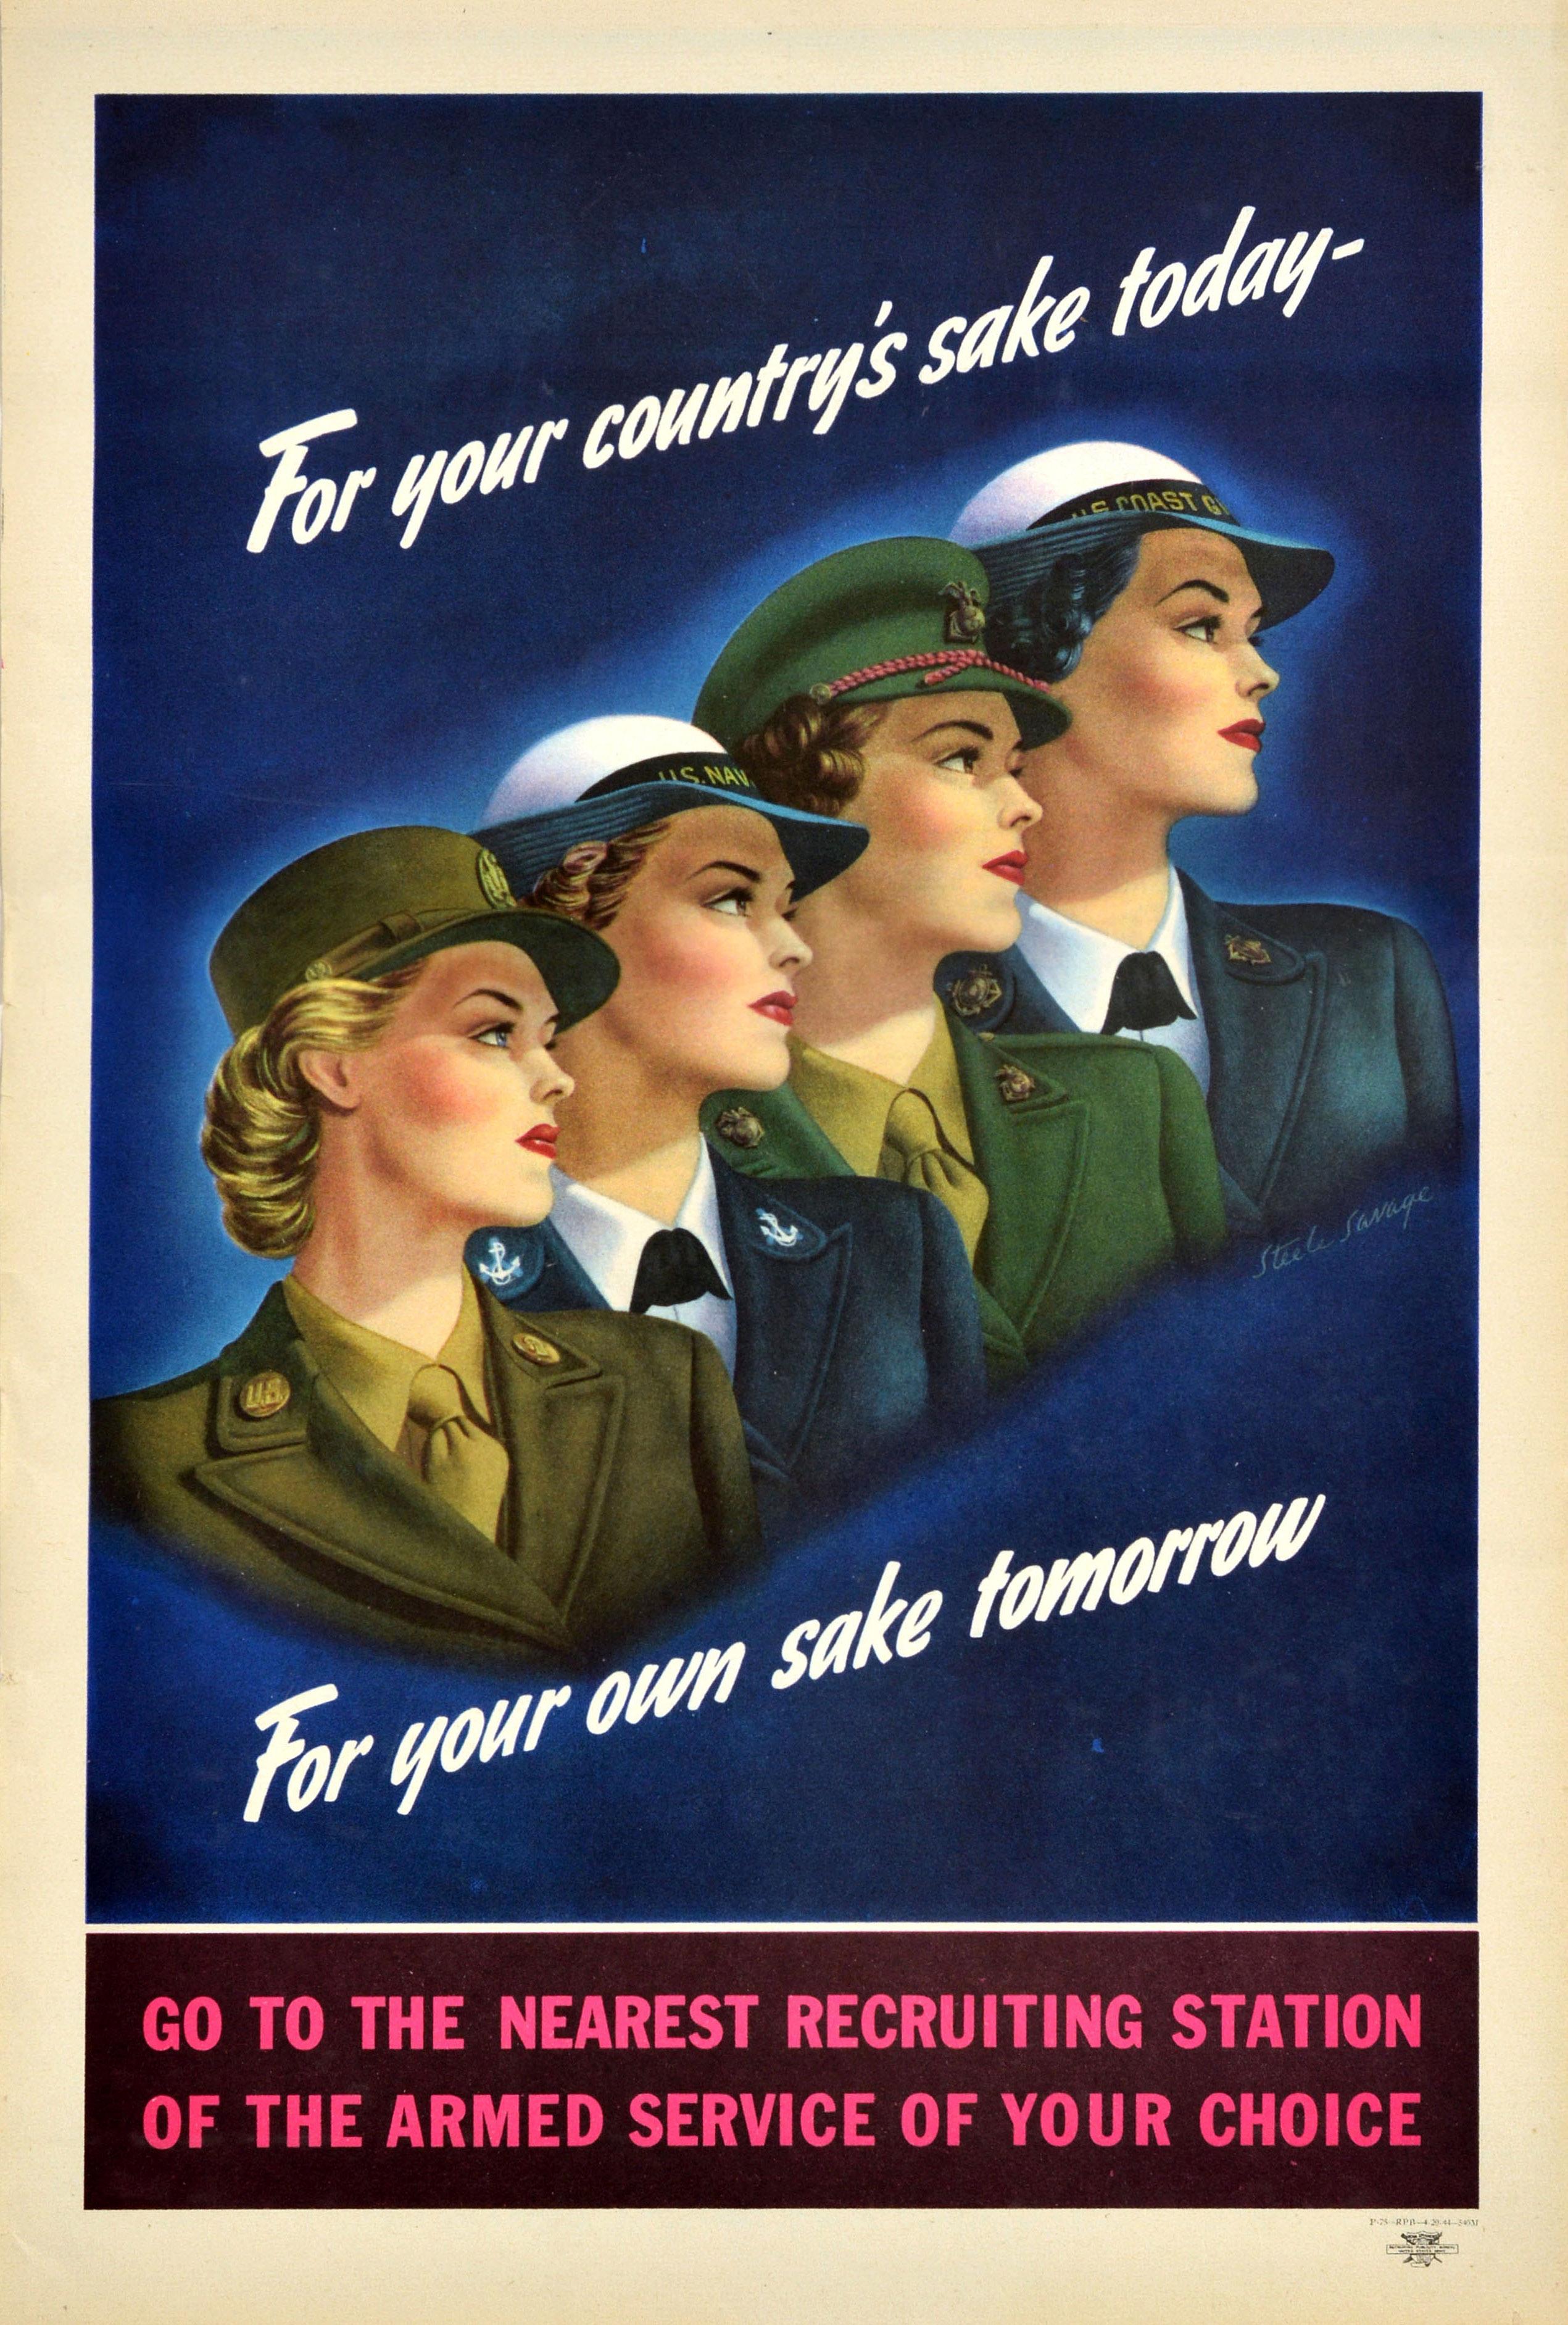 Unknown Print - Original Vintage American WWII Recruitment Poster For Your Country's Sake Today